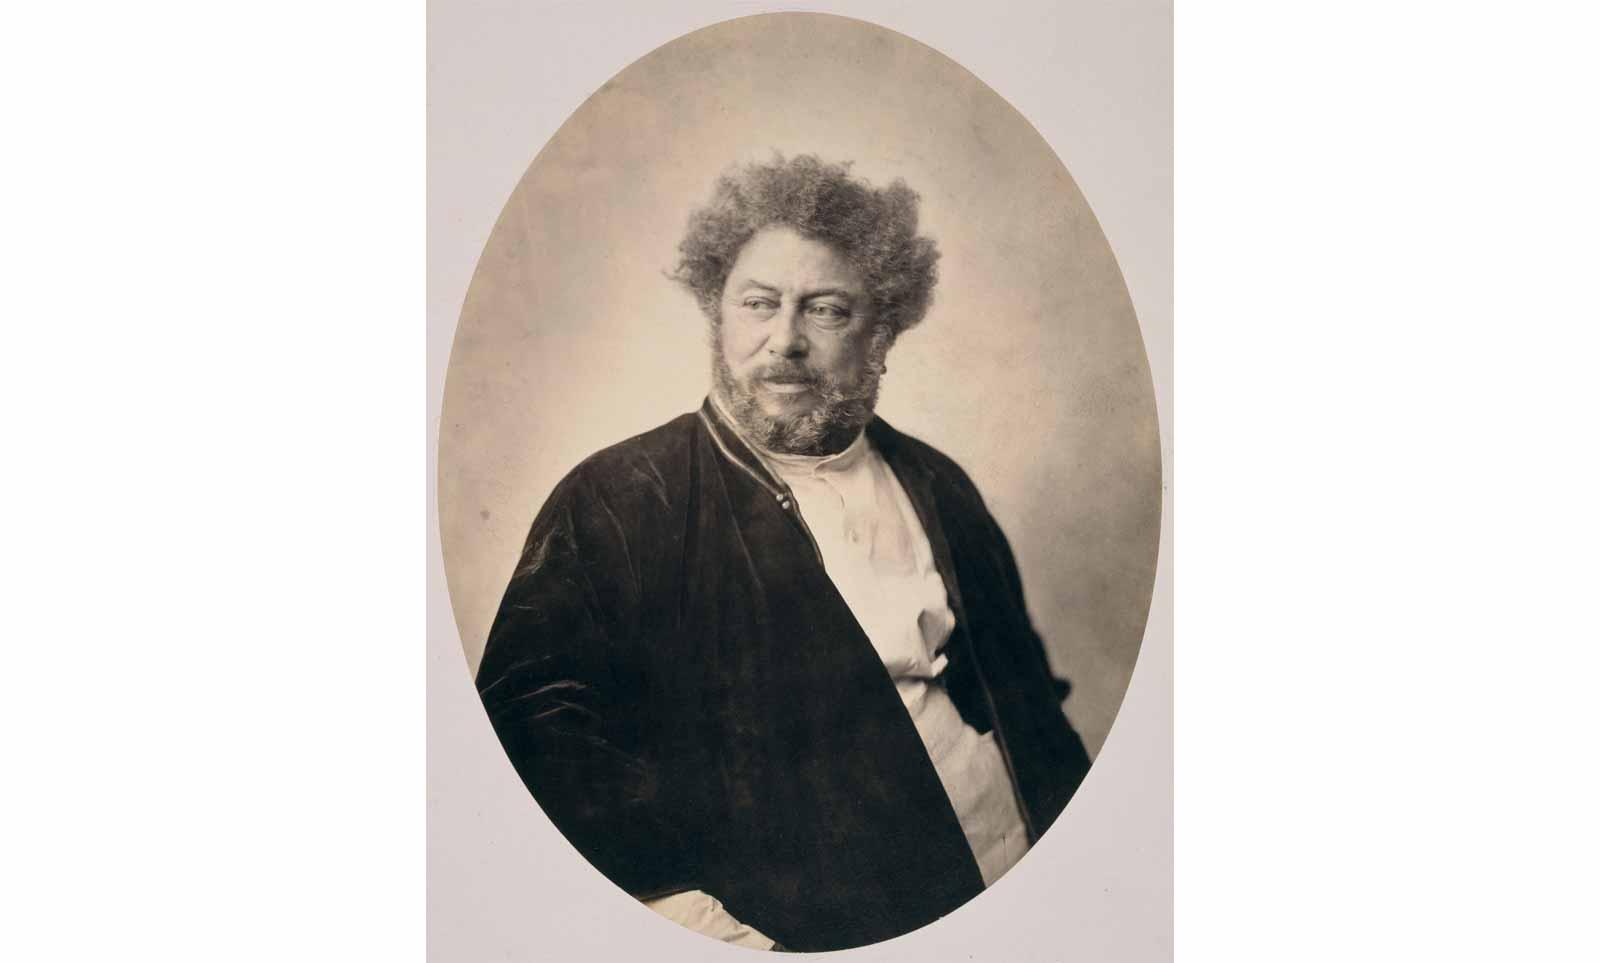 Gustave Le Gray (1820-1884), Portrait of Alexandre Dumas in Russian costume, 1859